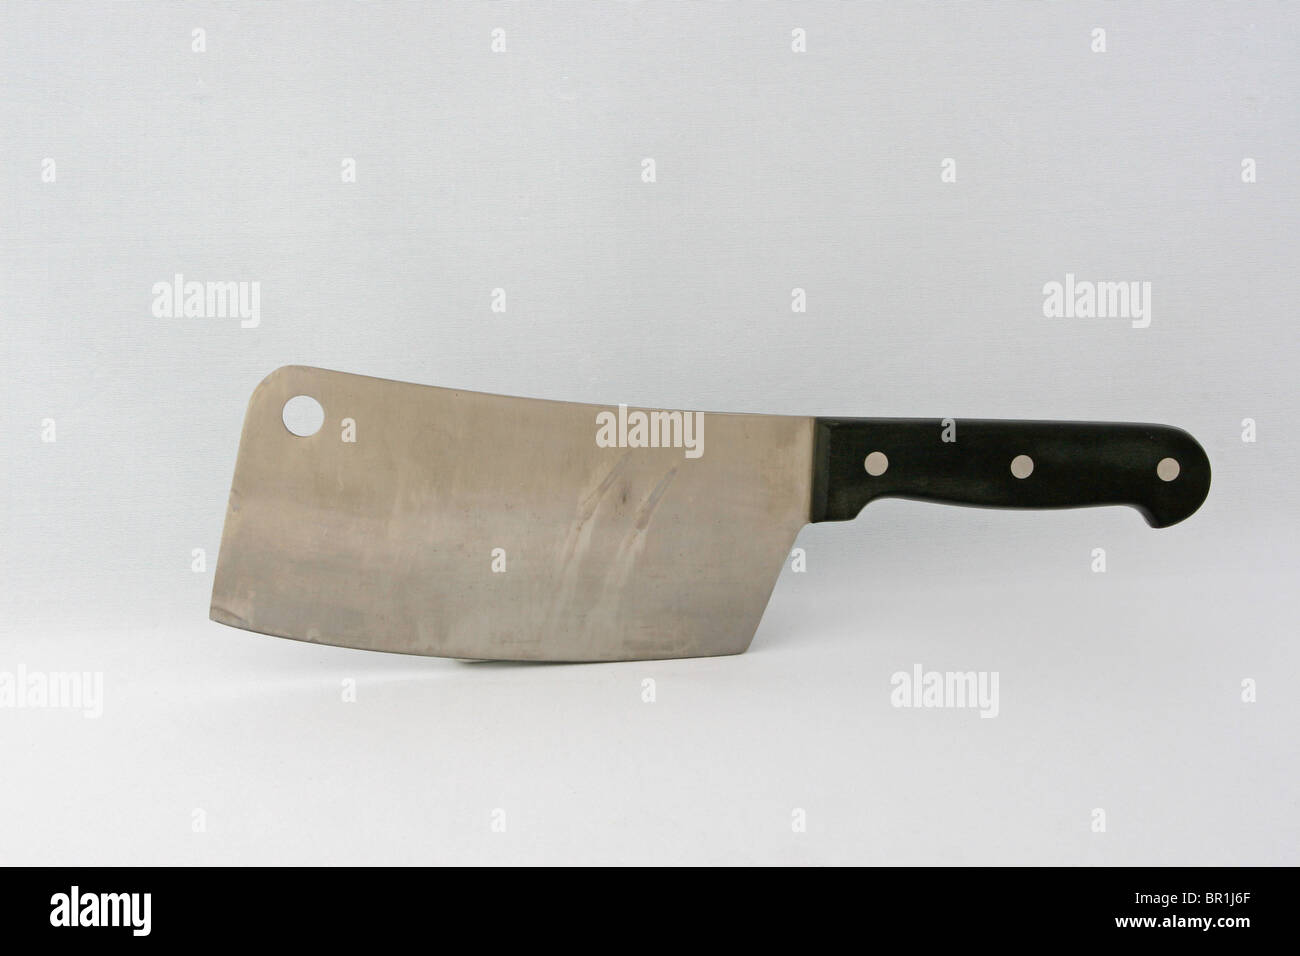 Still life meat cleaver Stock Photo